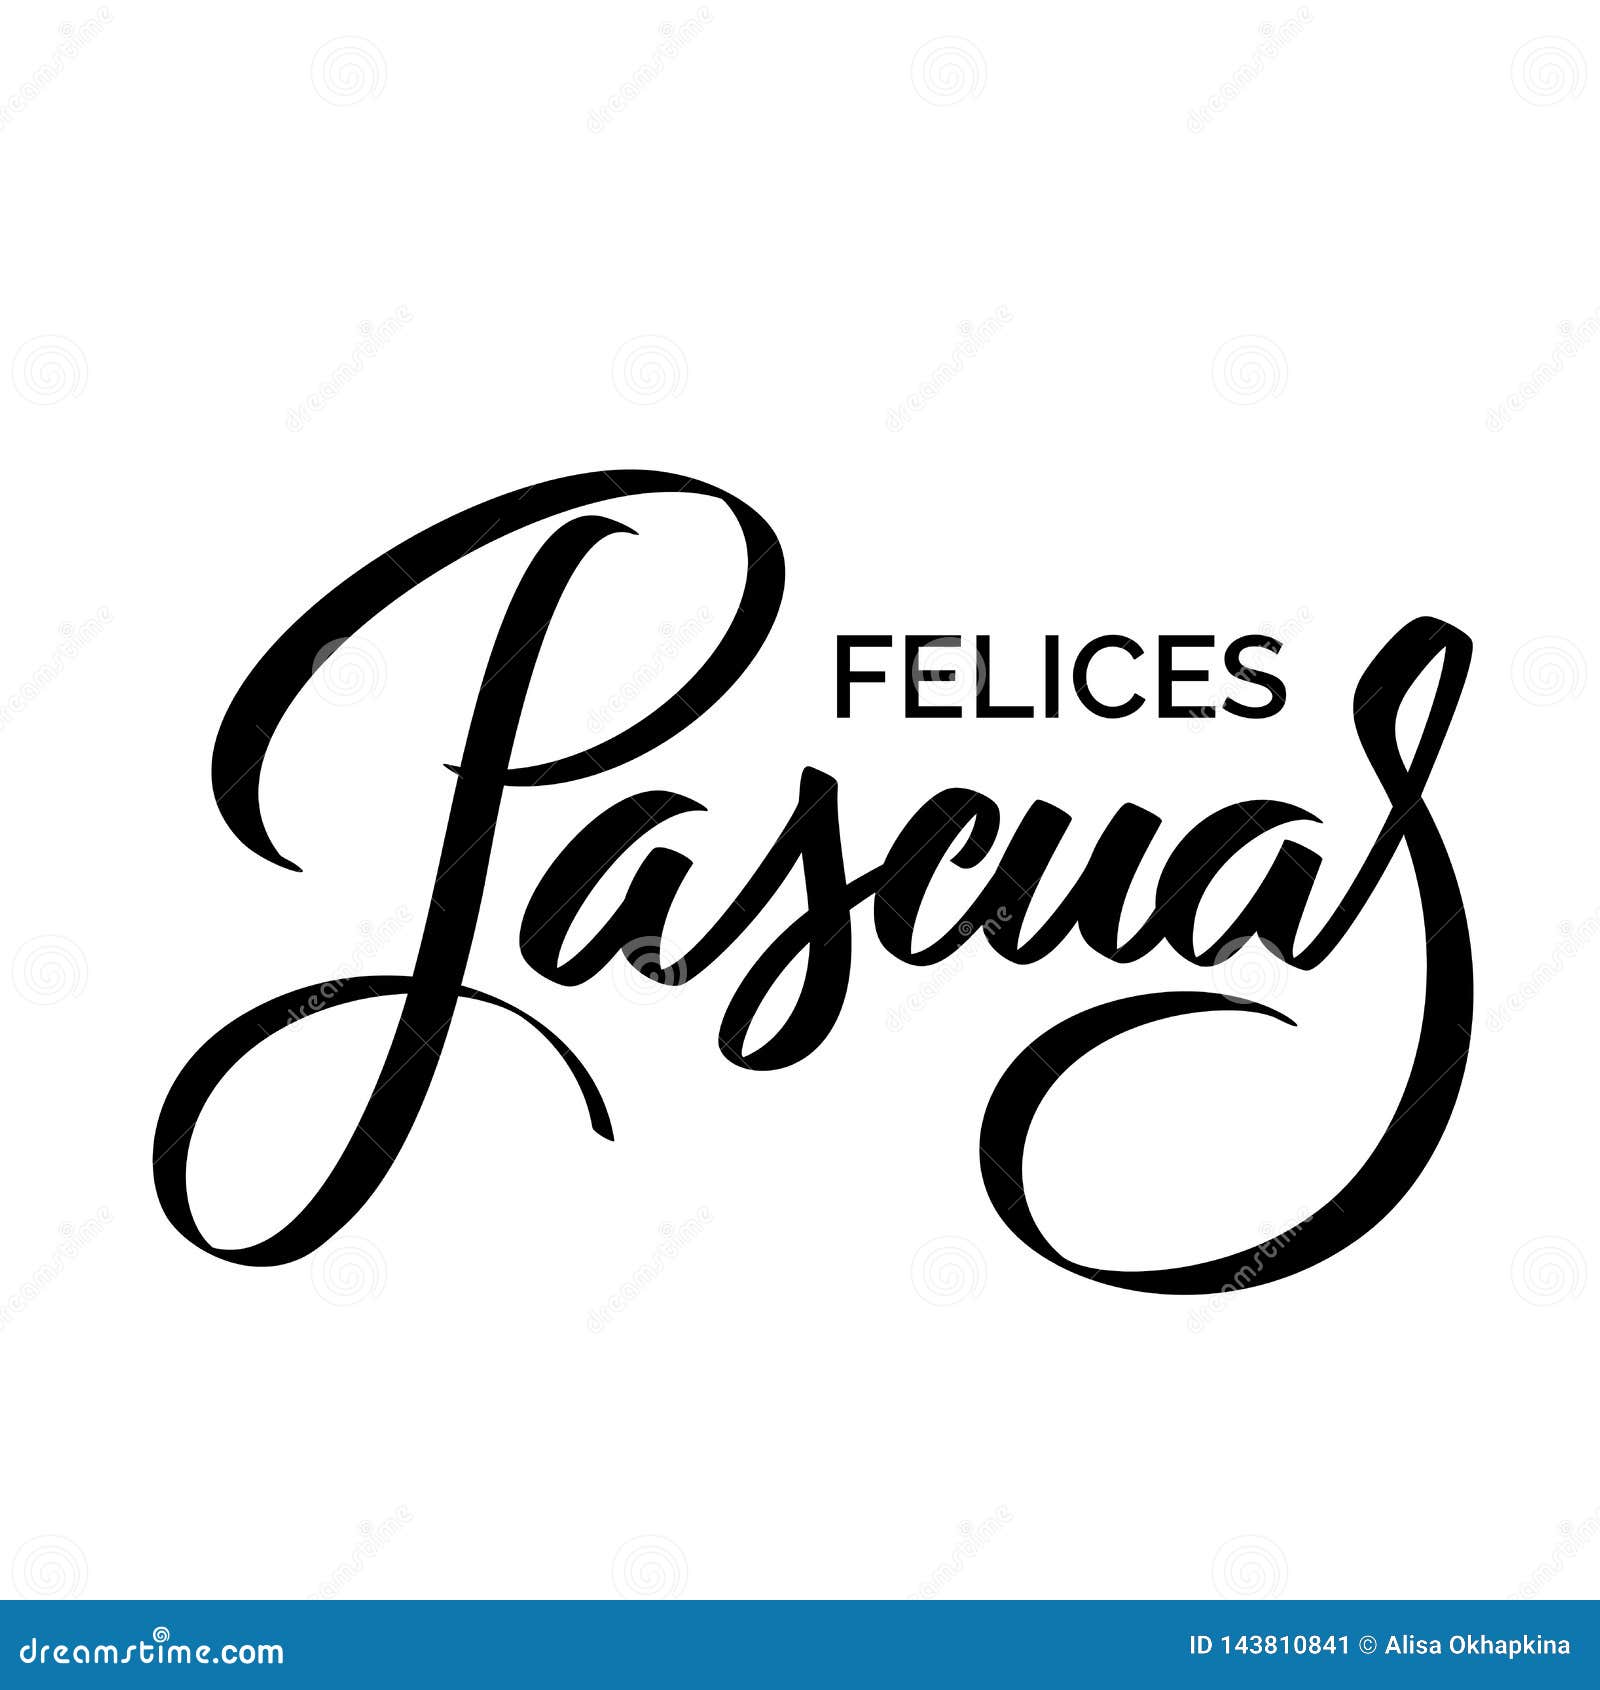 felices pascuas - easter greetings on spanish